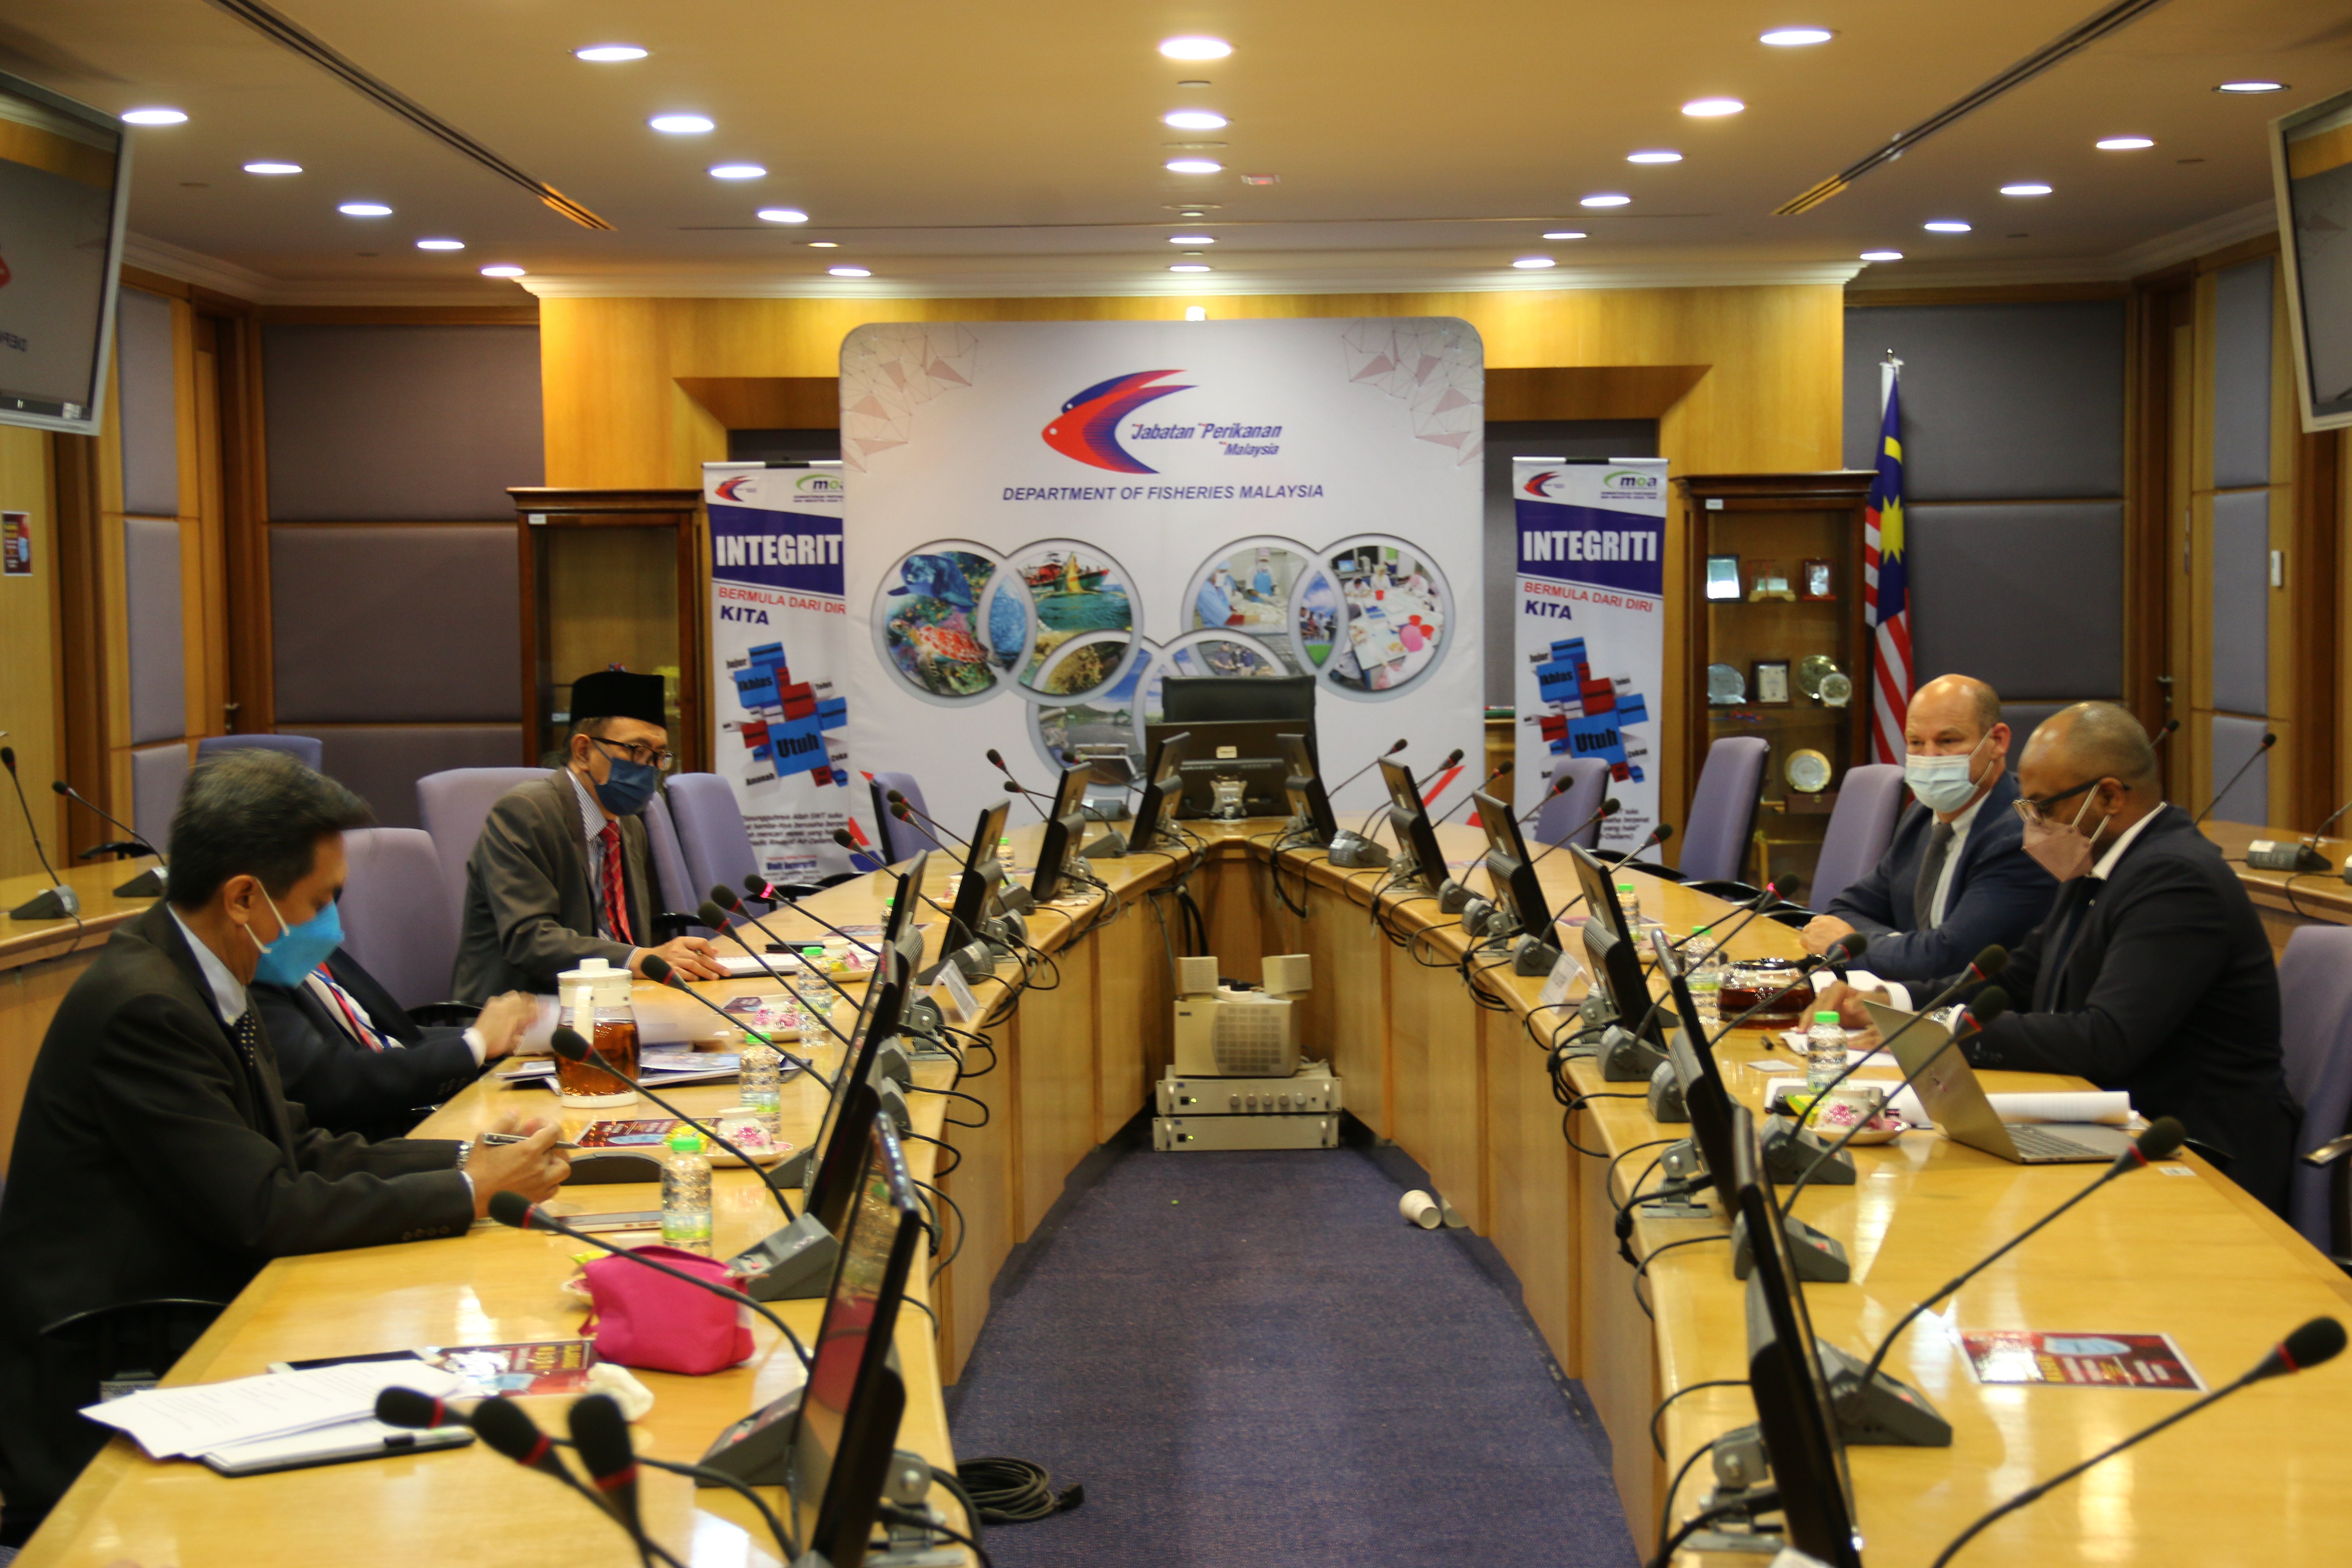 The delegation from WorldFish in discussion with the leadership team of the Department of Fisheries at Putrajaya, Malaysia on ways to foster a stronger partnership between the two agencies. Photo by Sean Lee Kuan Shern 